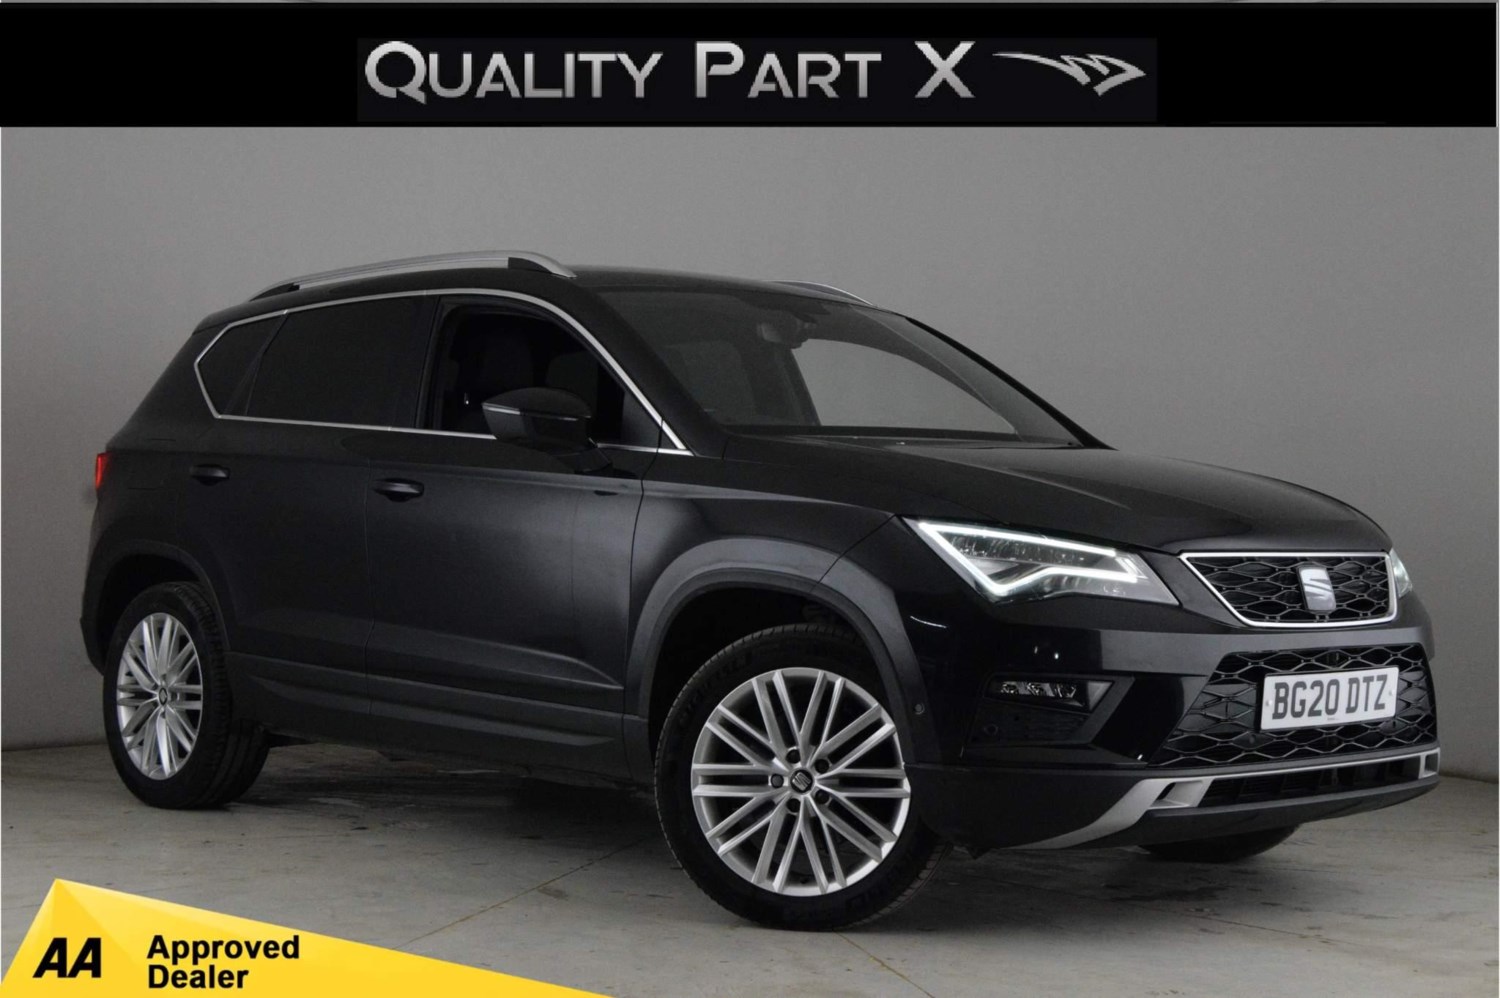 2020 used SEAT Ateca 2.0 TSI XCELLENCE DSG 4Drive Euro 6 (s/s) 5dr